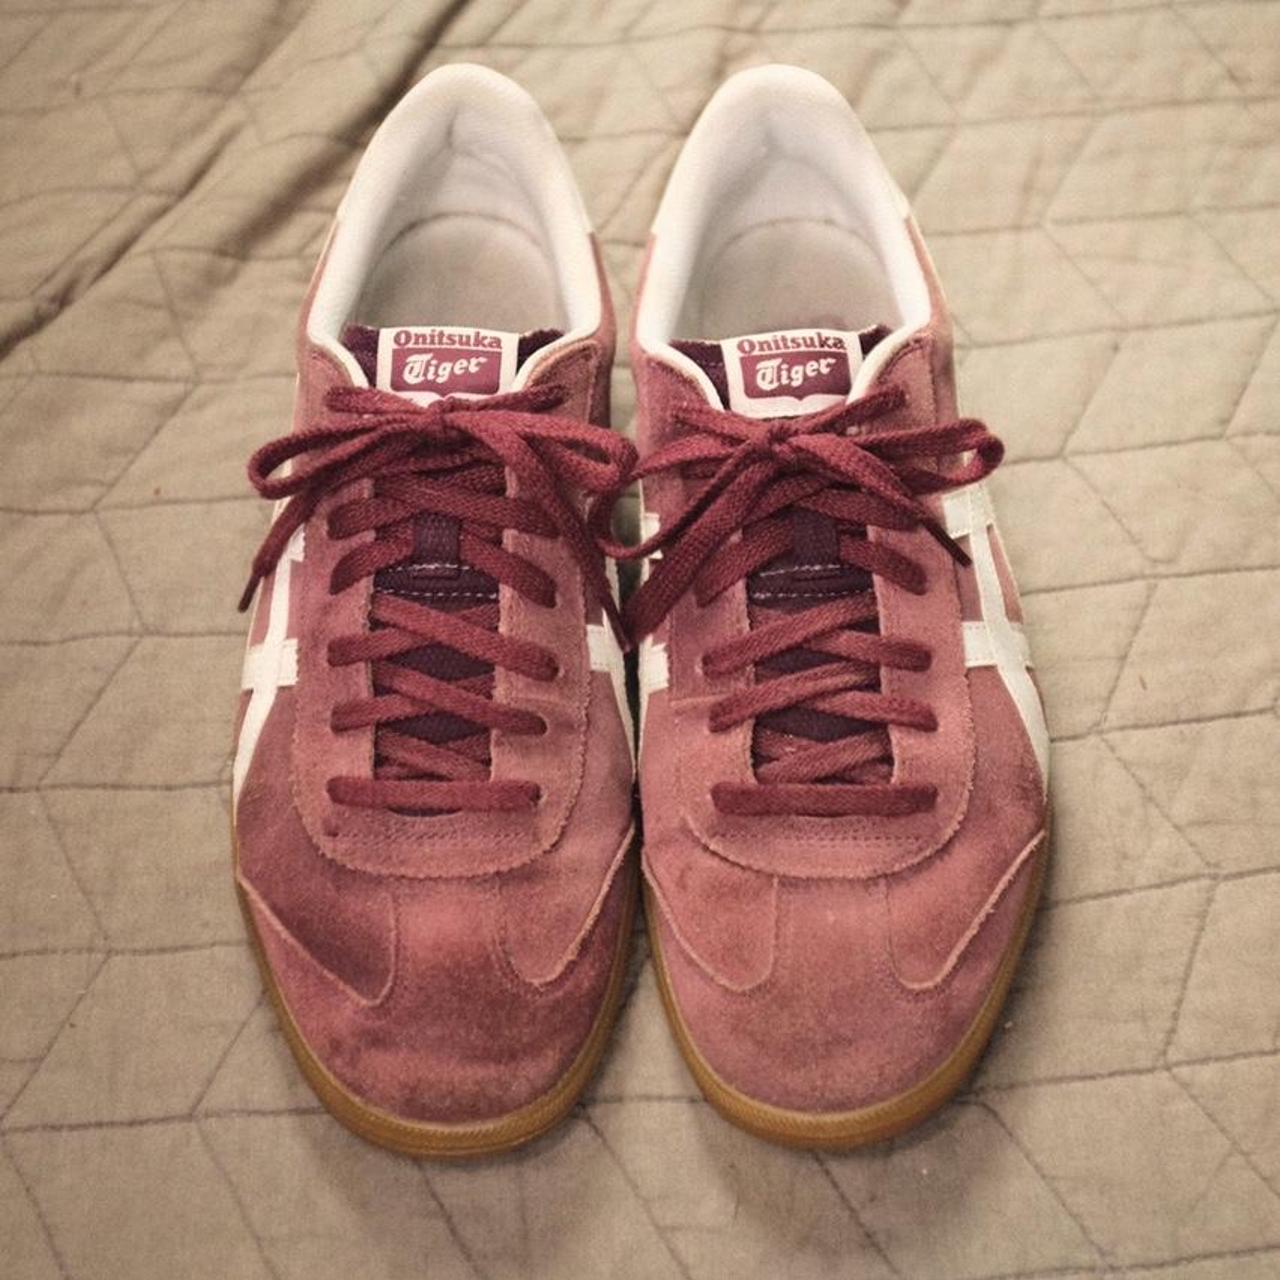 Product Image 2 - Barely worn burgundy suede Onitsuka